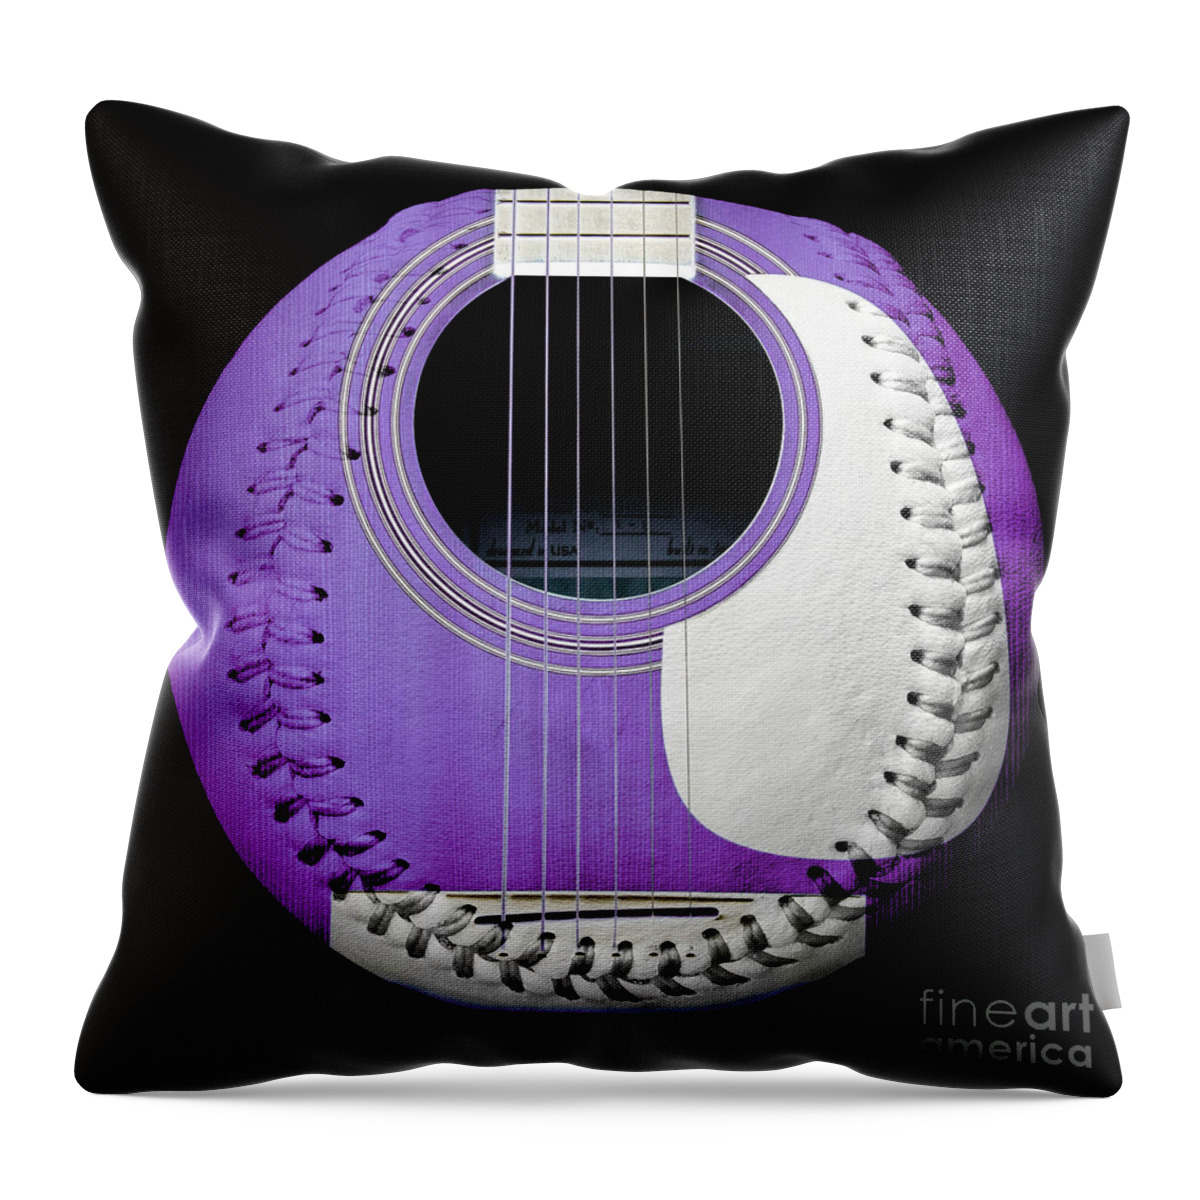 Baseball Throw Pillow featuring the digital art Purple Guitar Baseball White Laces Square by Andee Design